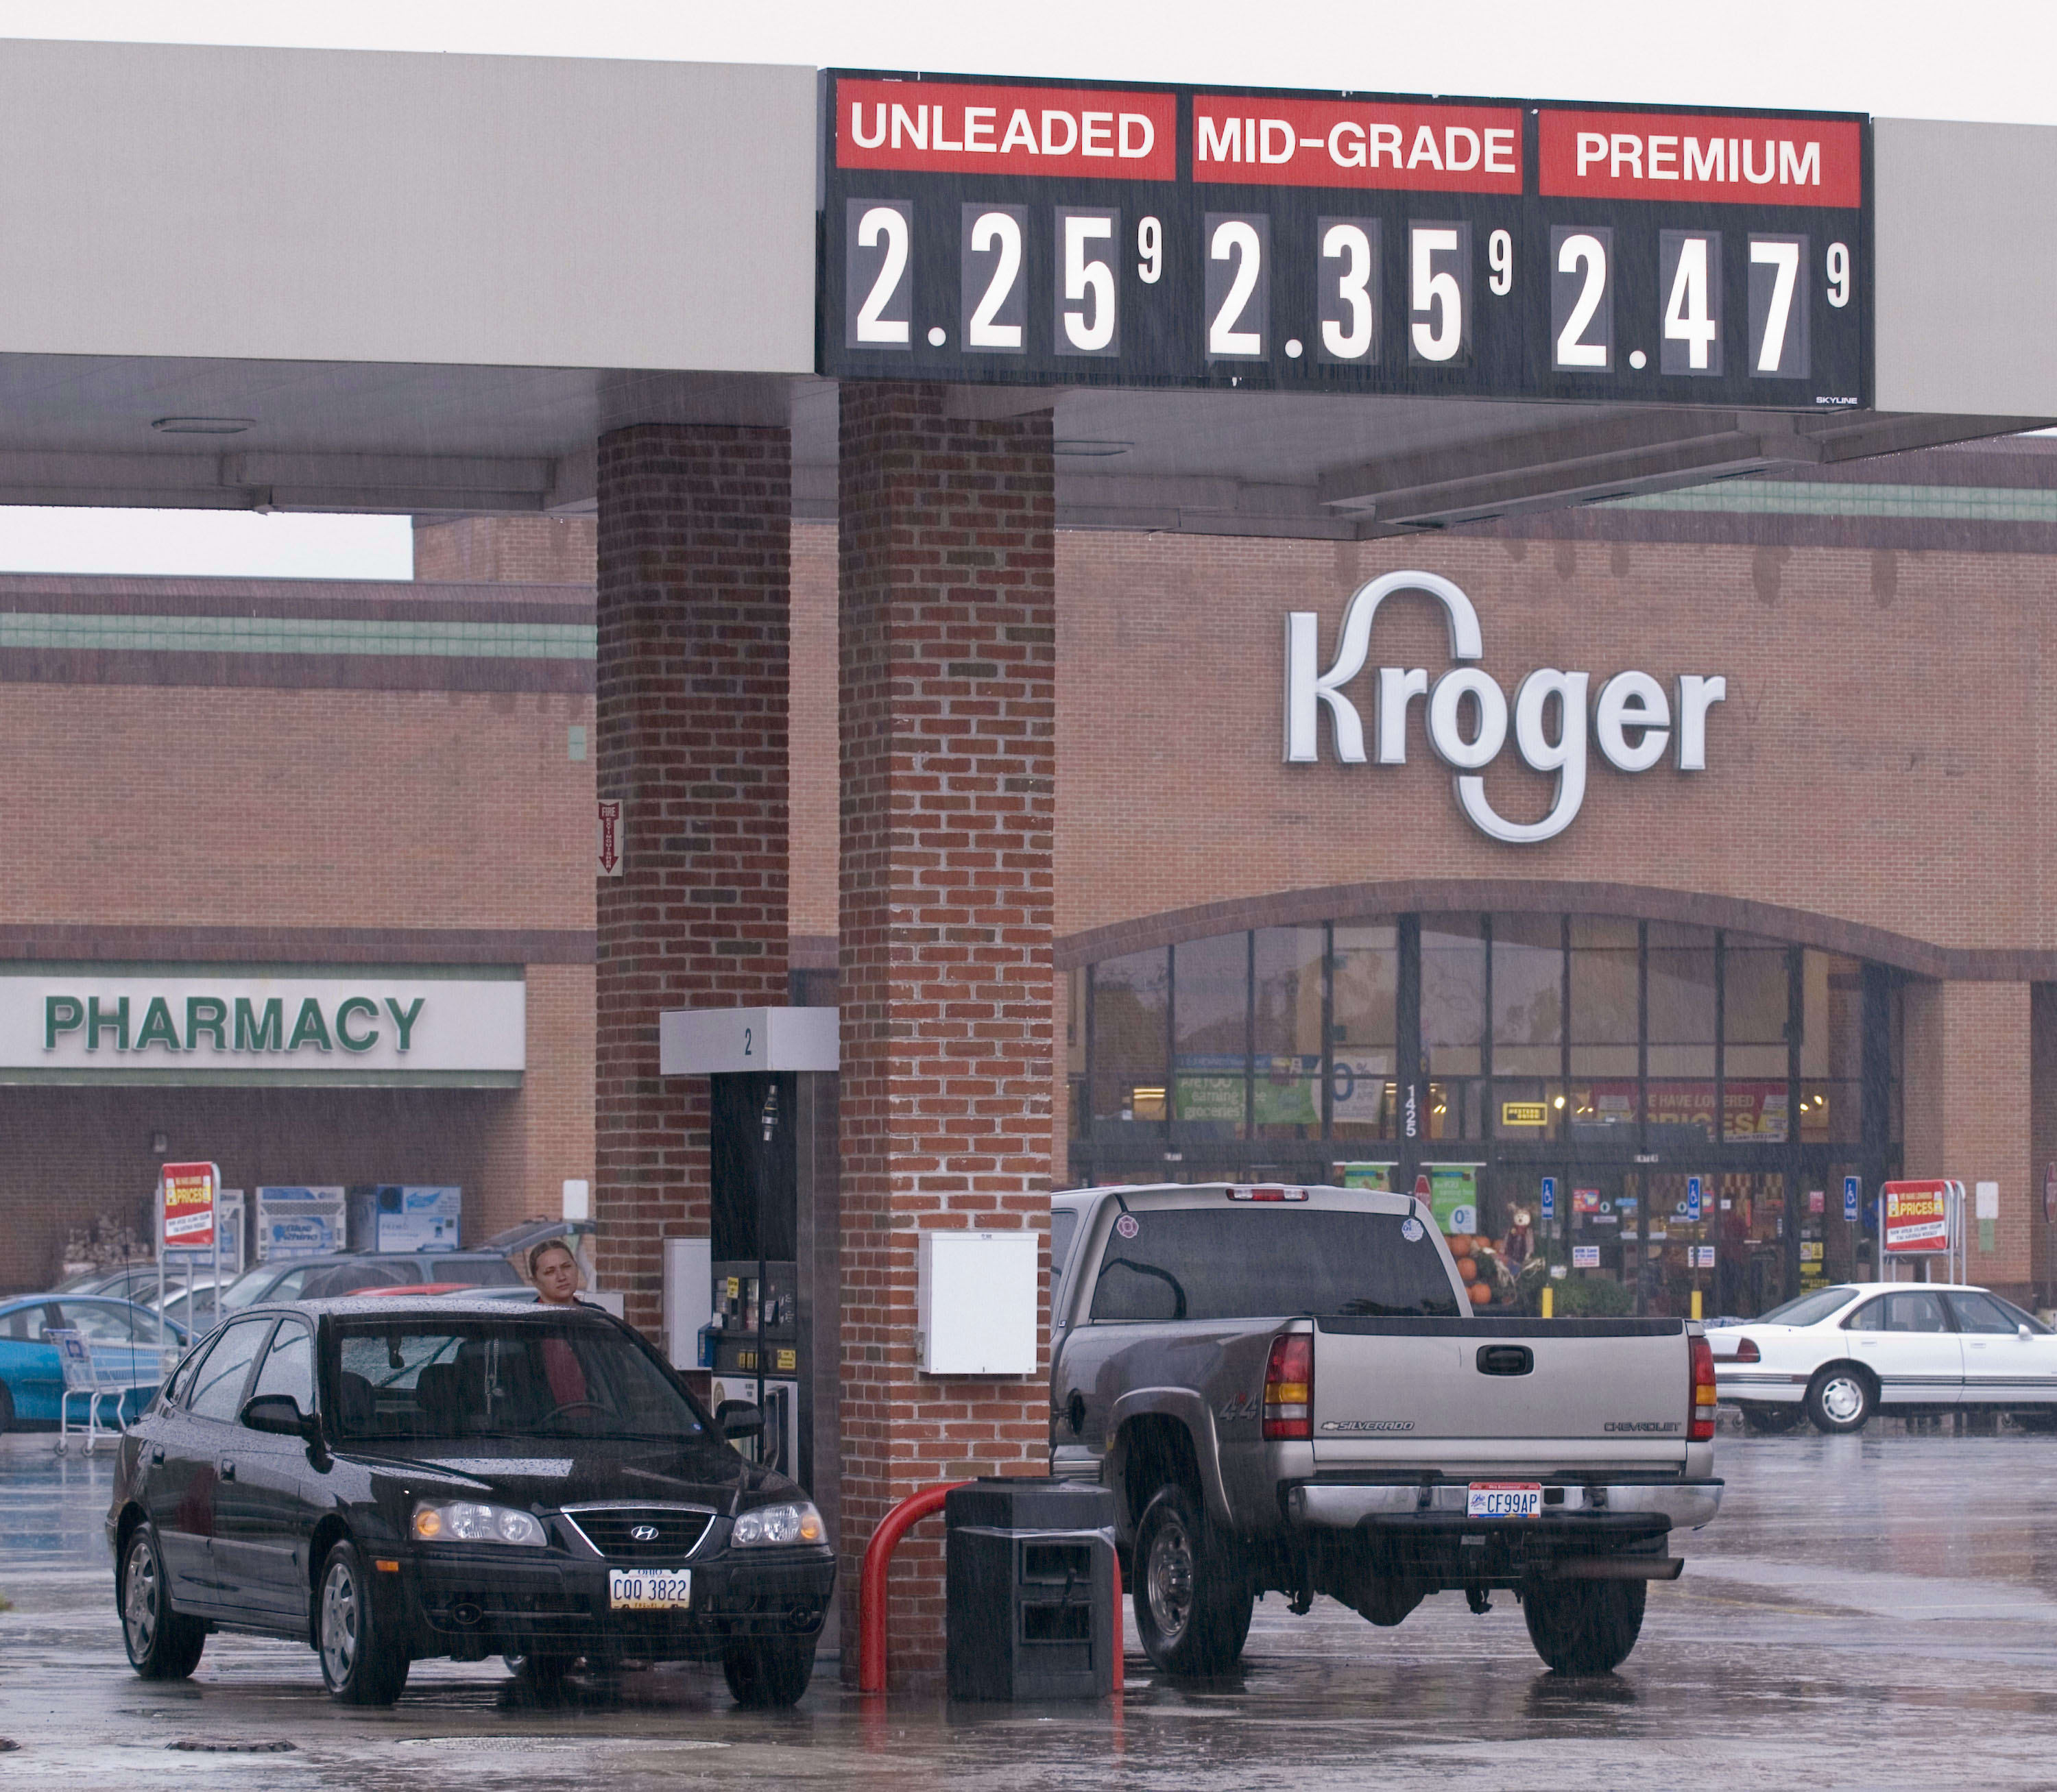 Kroger joins Walmart, asks shoppers not to openly carry guns in stores